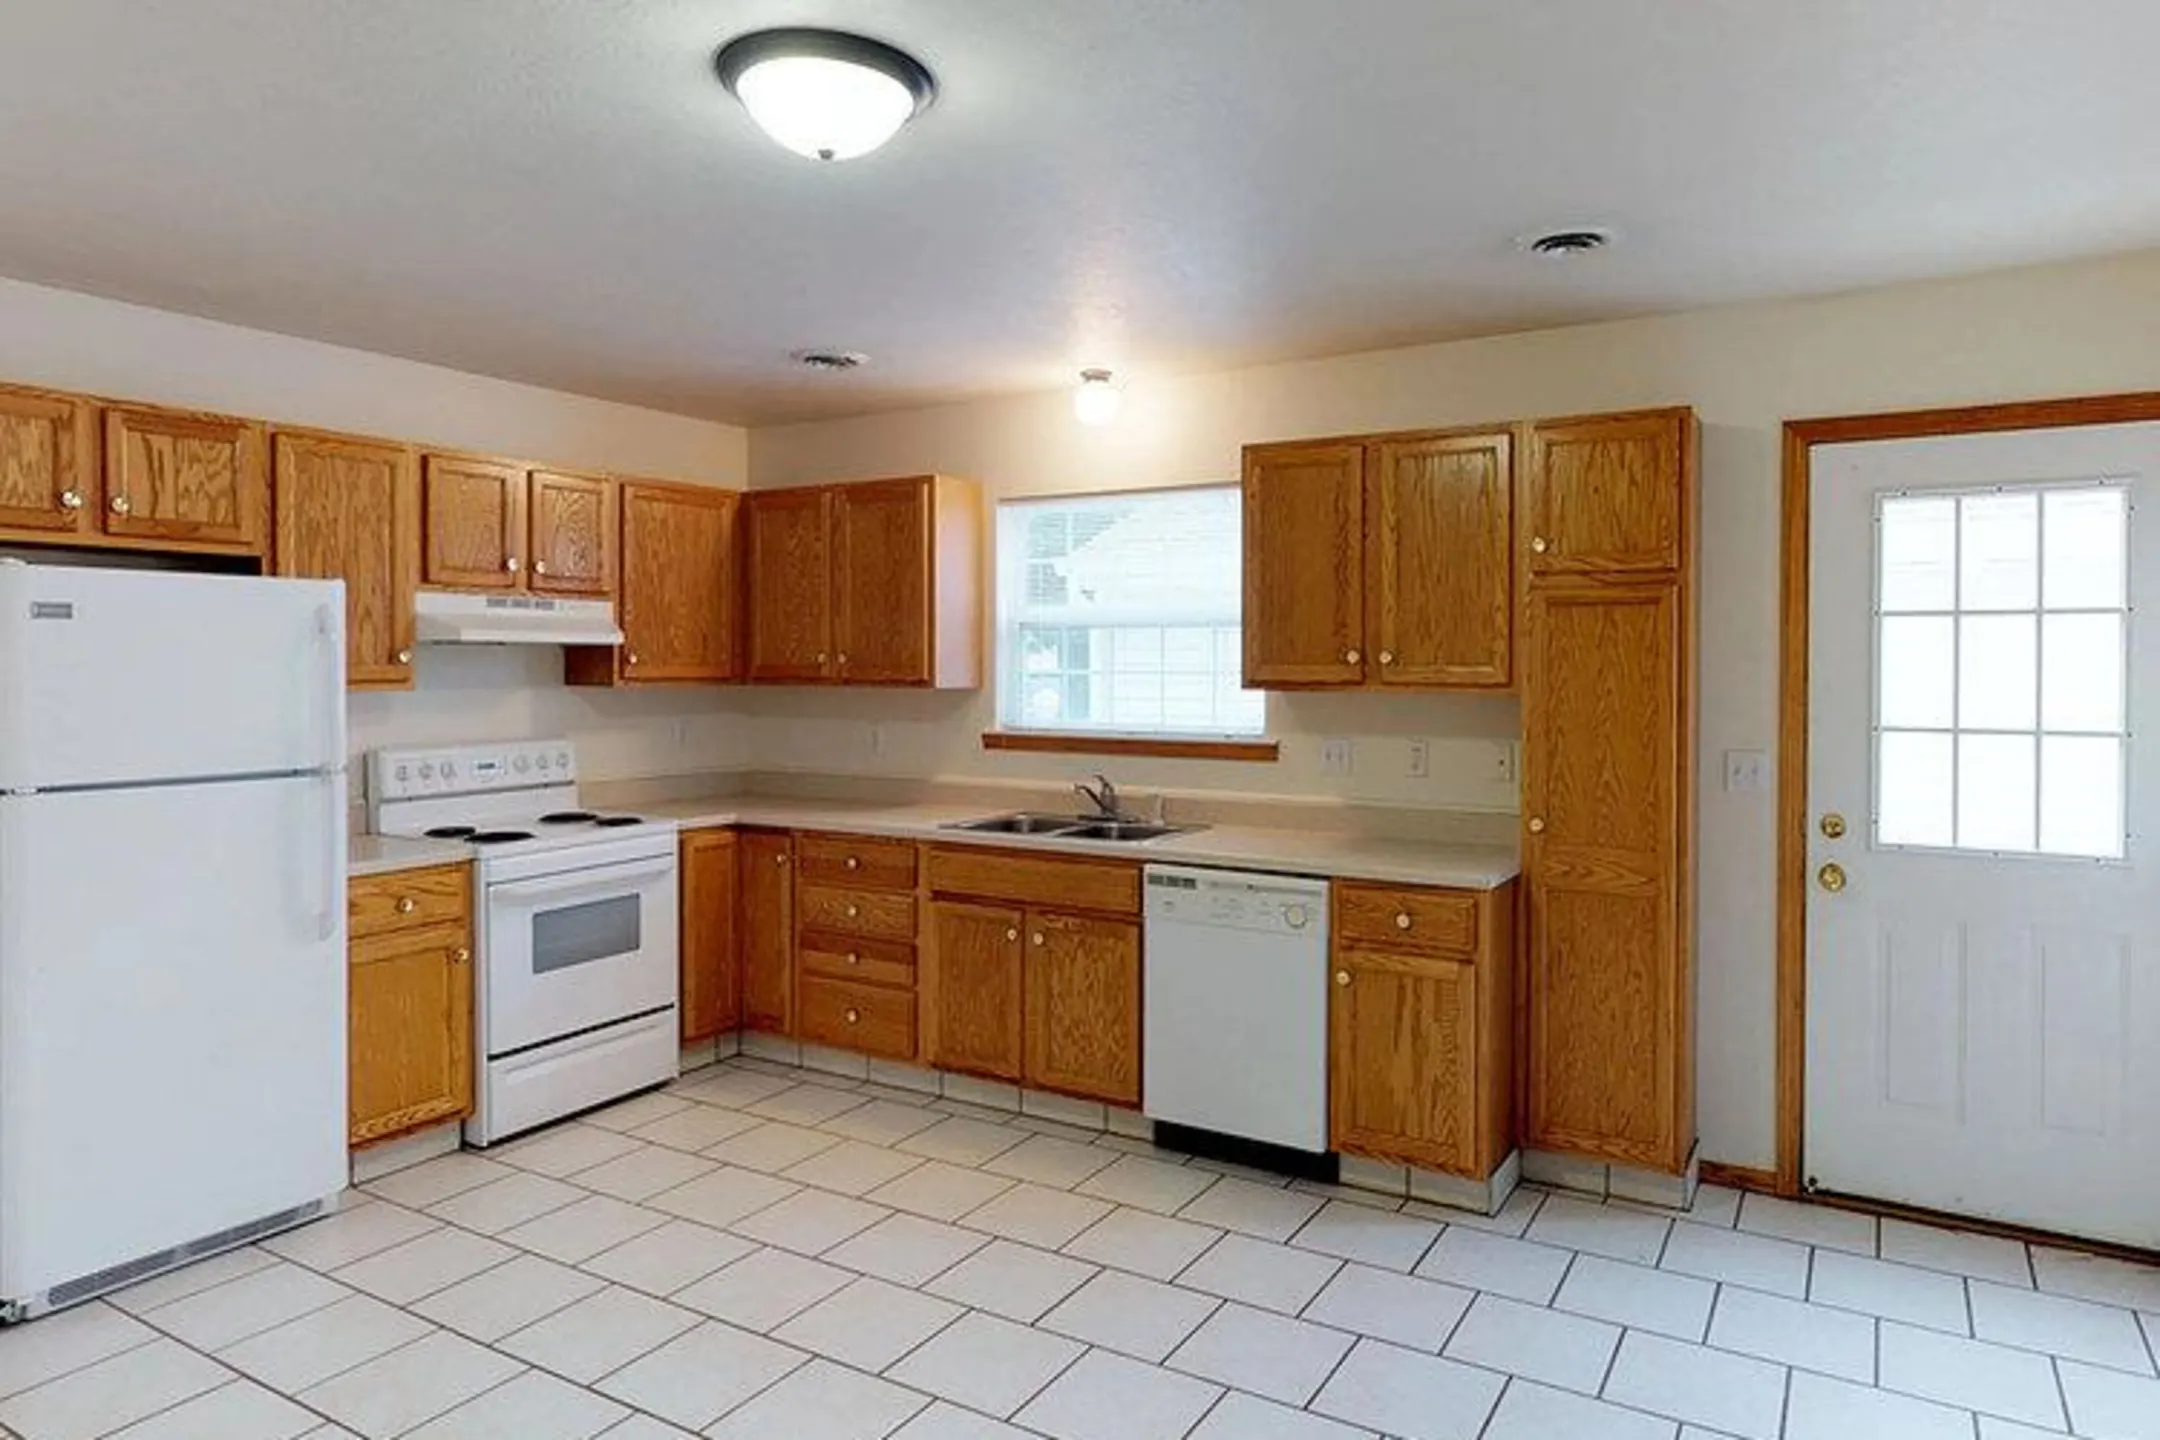 Kitchen - The Gables Townhomes - Sioux Falls, SD